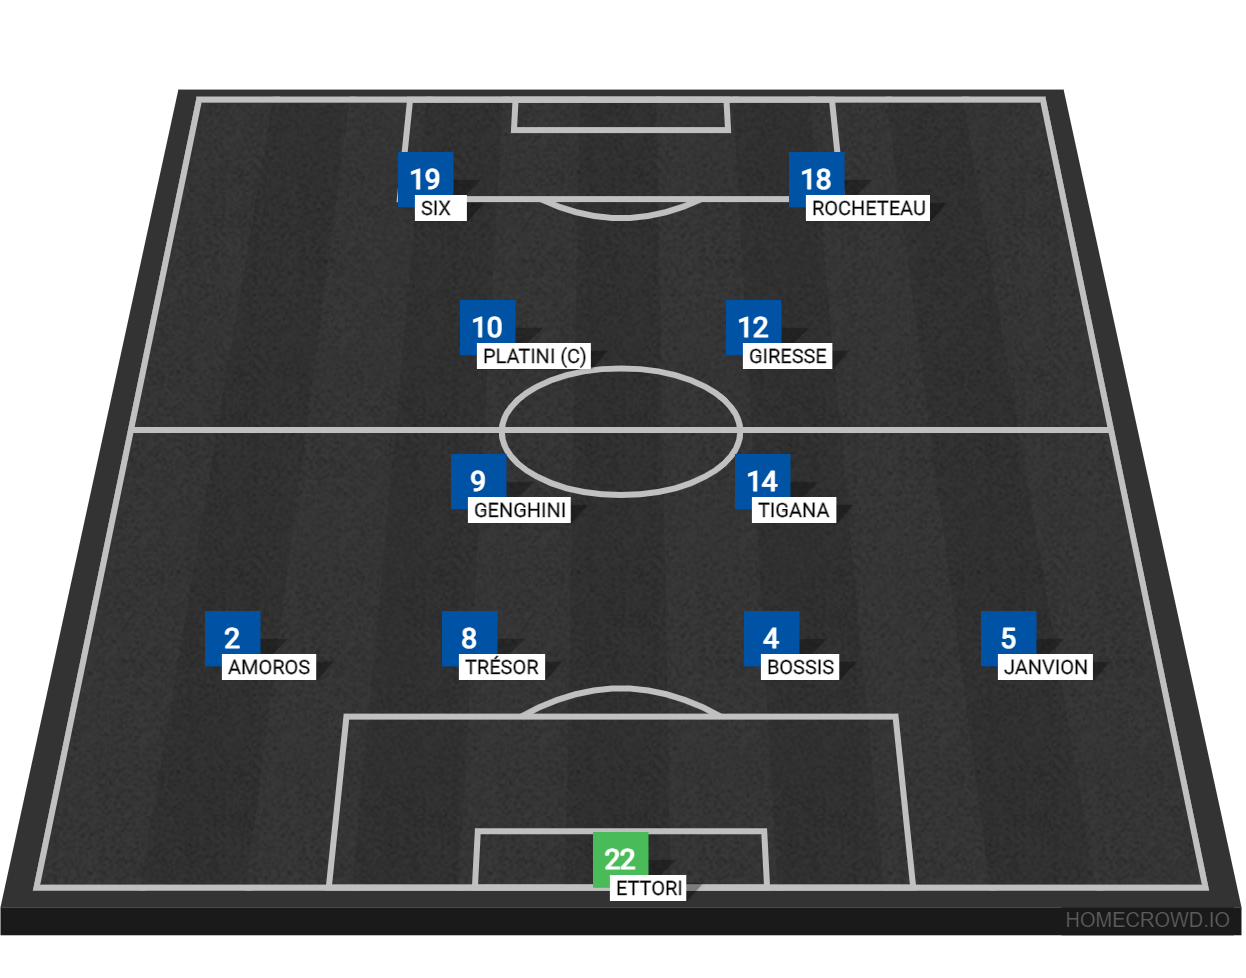 France 1982 World Cup football lineup against West Germany, highlighting key players and moments from their iconic semi-final clash. Image designed using homecrowd.io lineup formation maker.